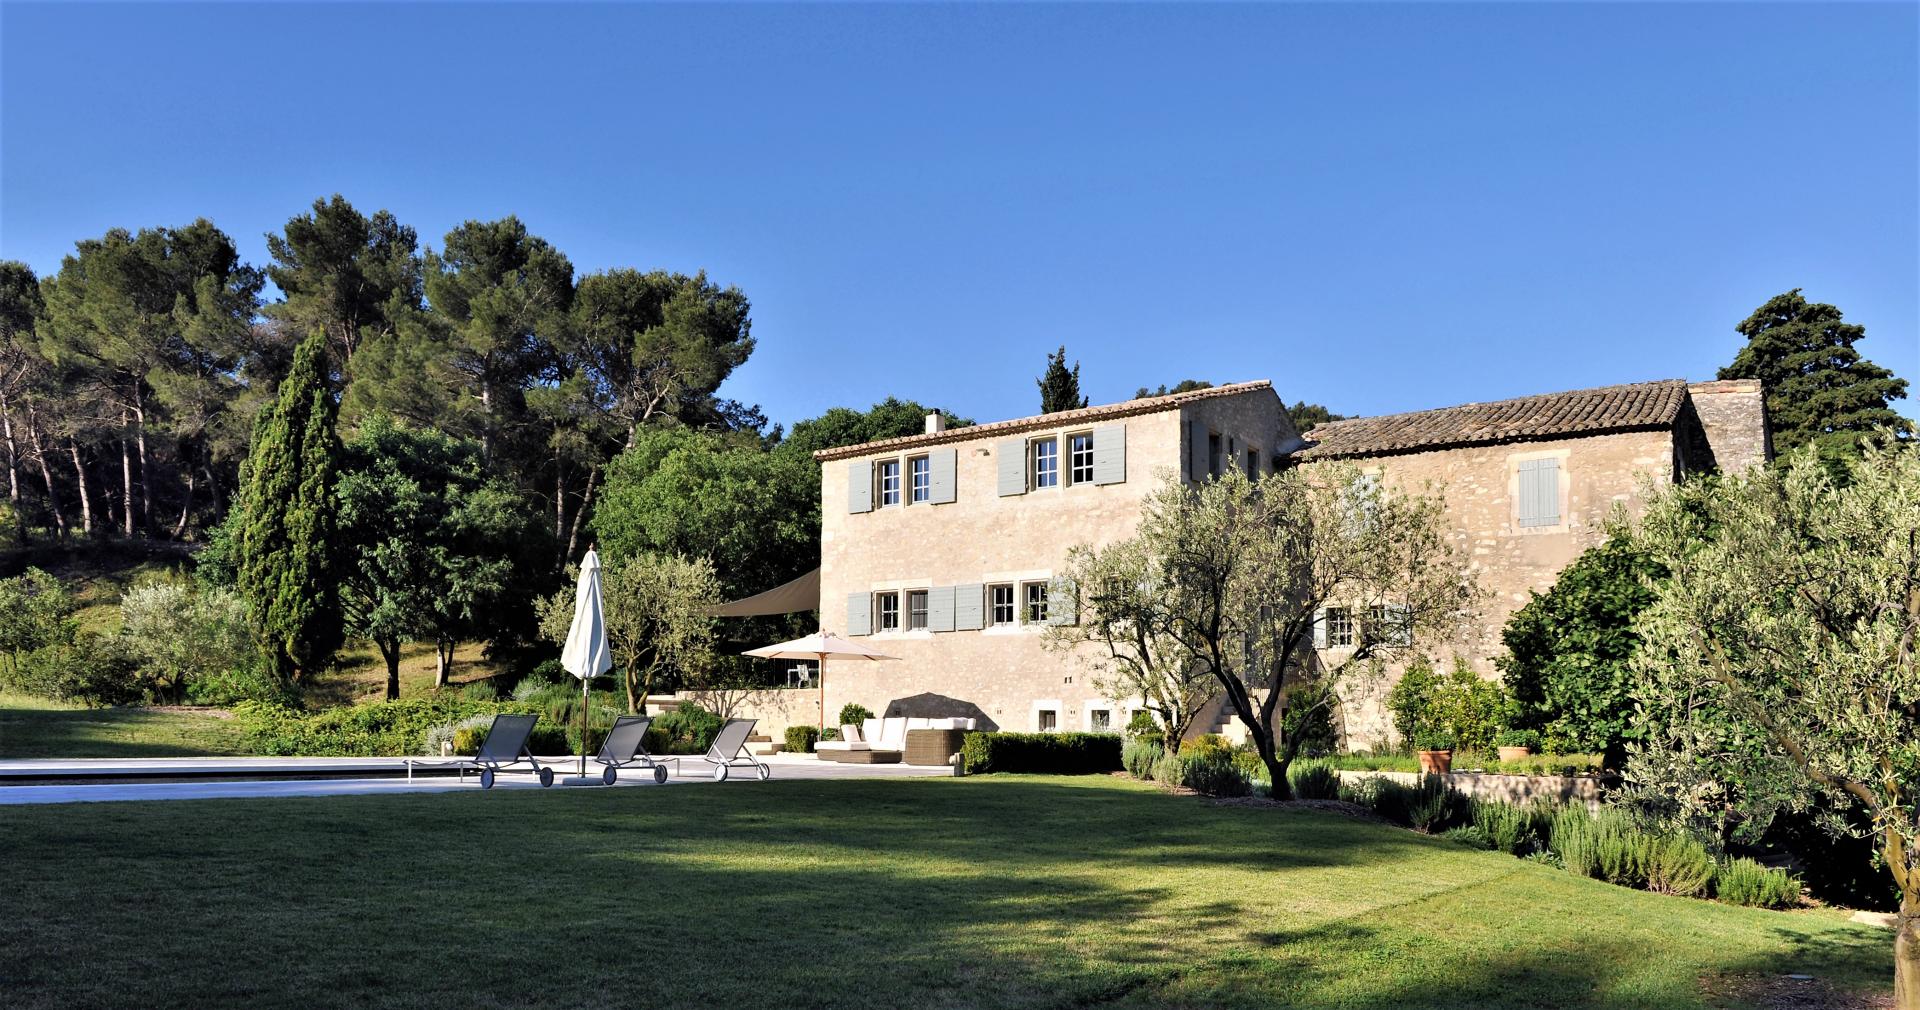 A  HOLIDAY VILLA TO RENT IN PROVENCE